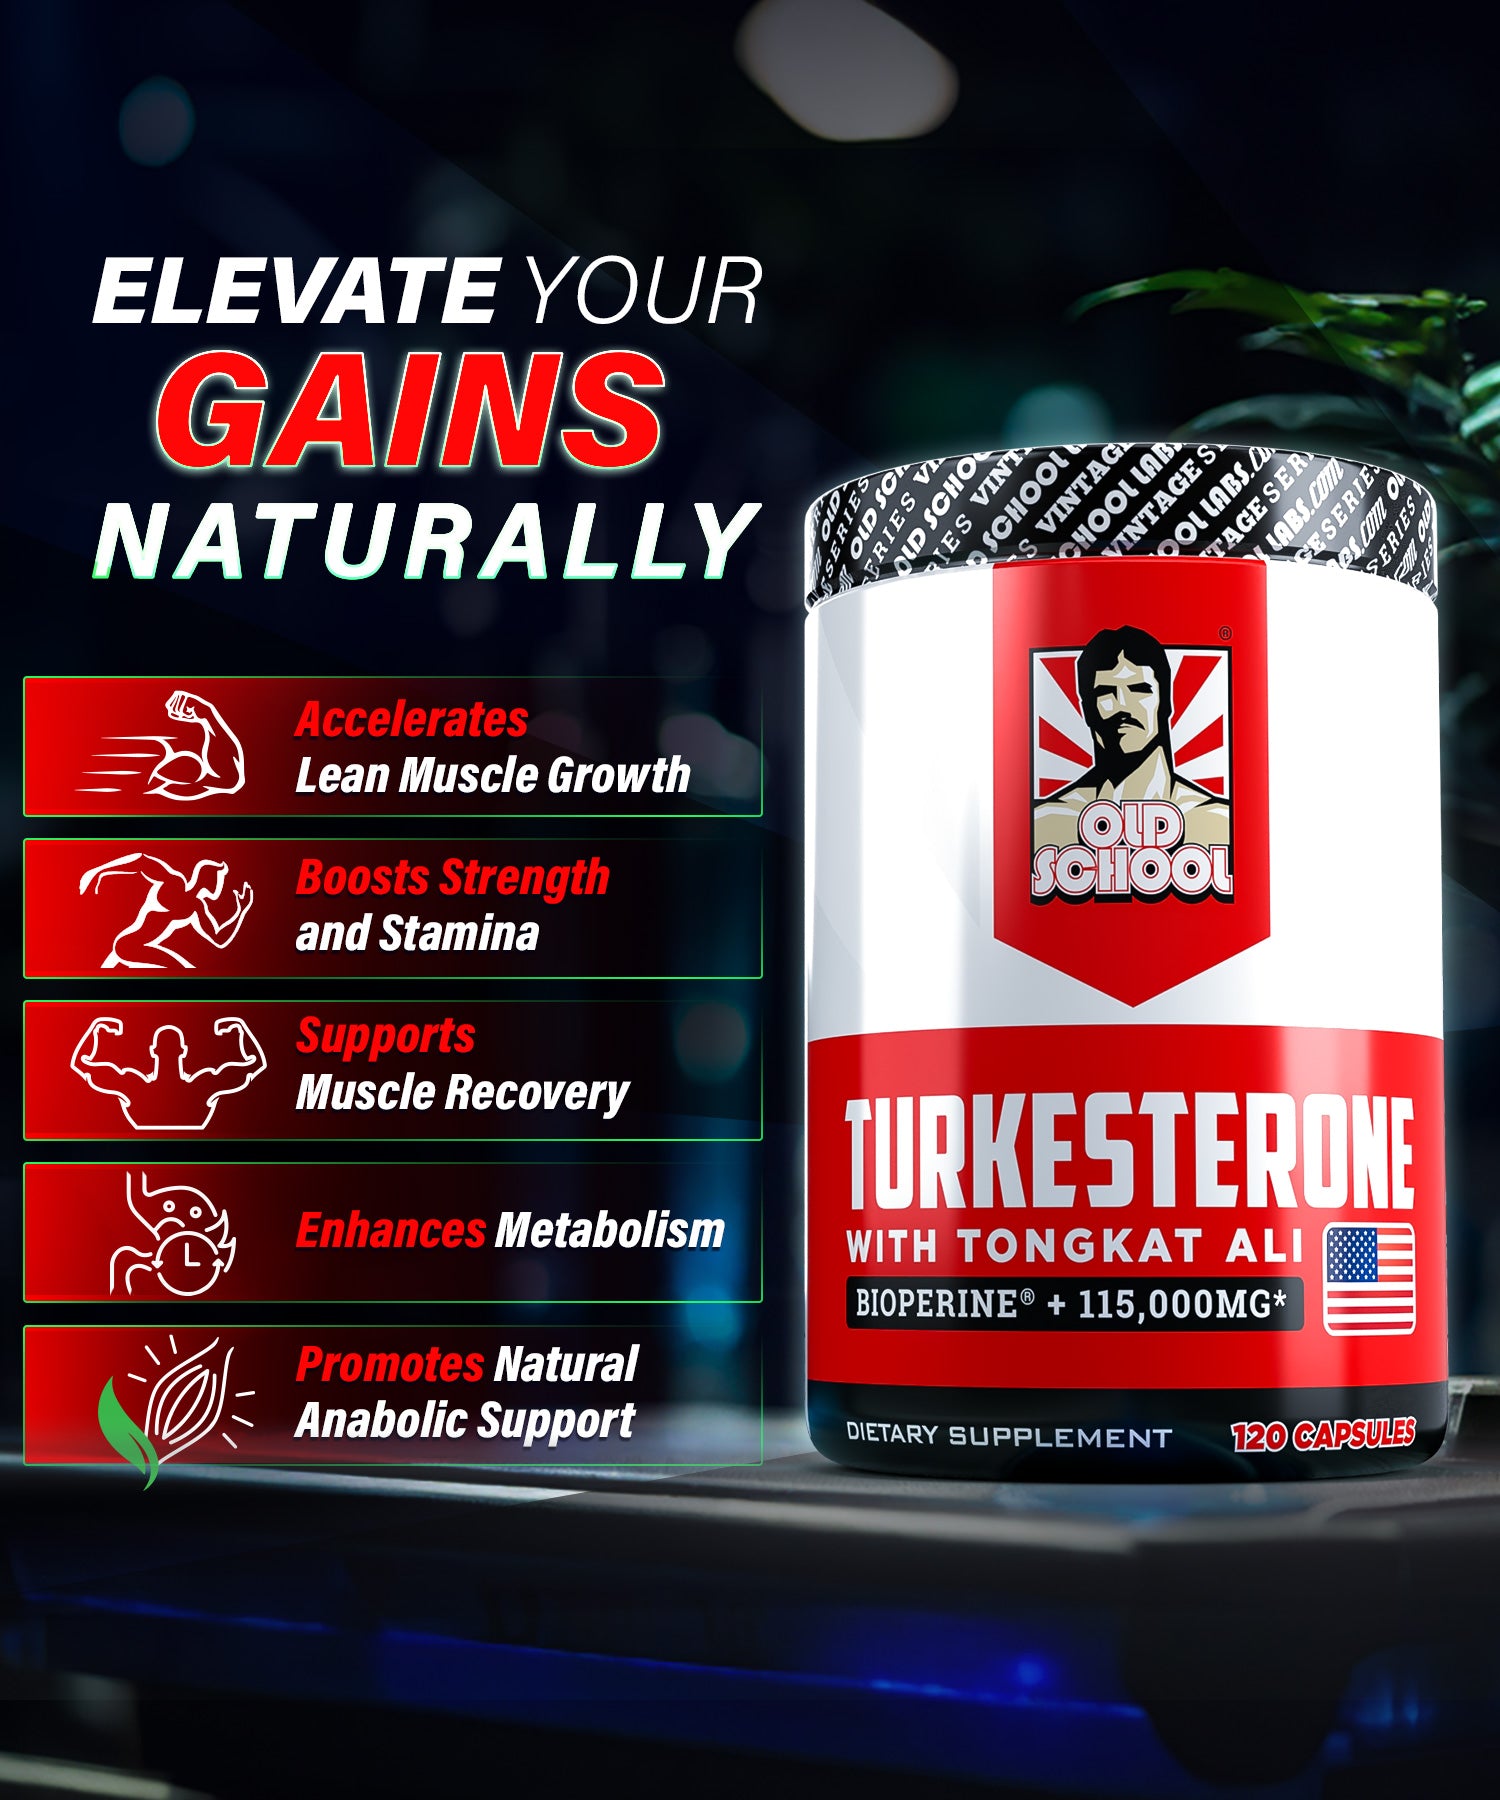 Elevate your gains naturally